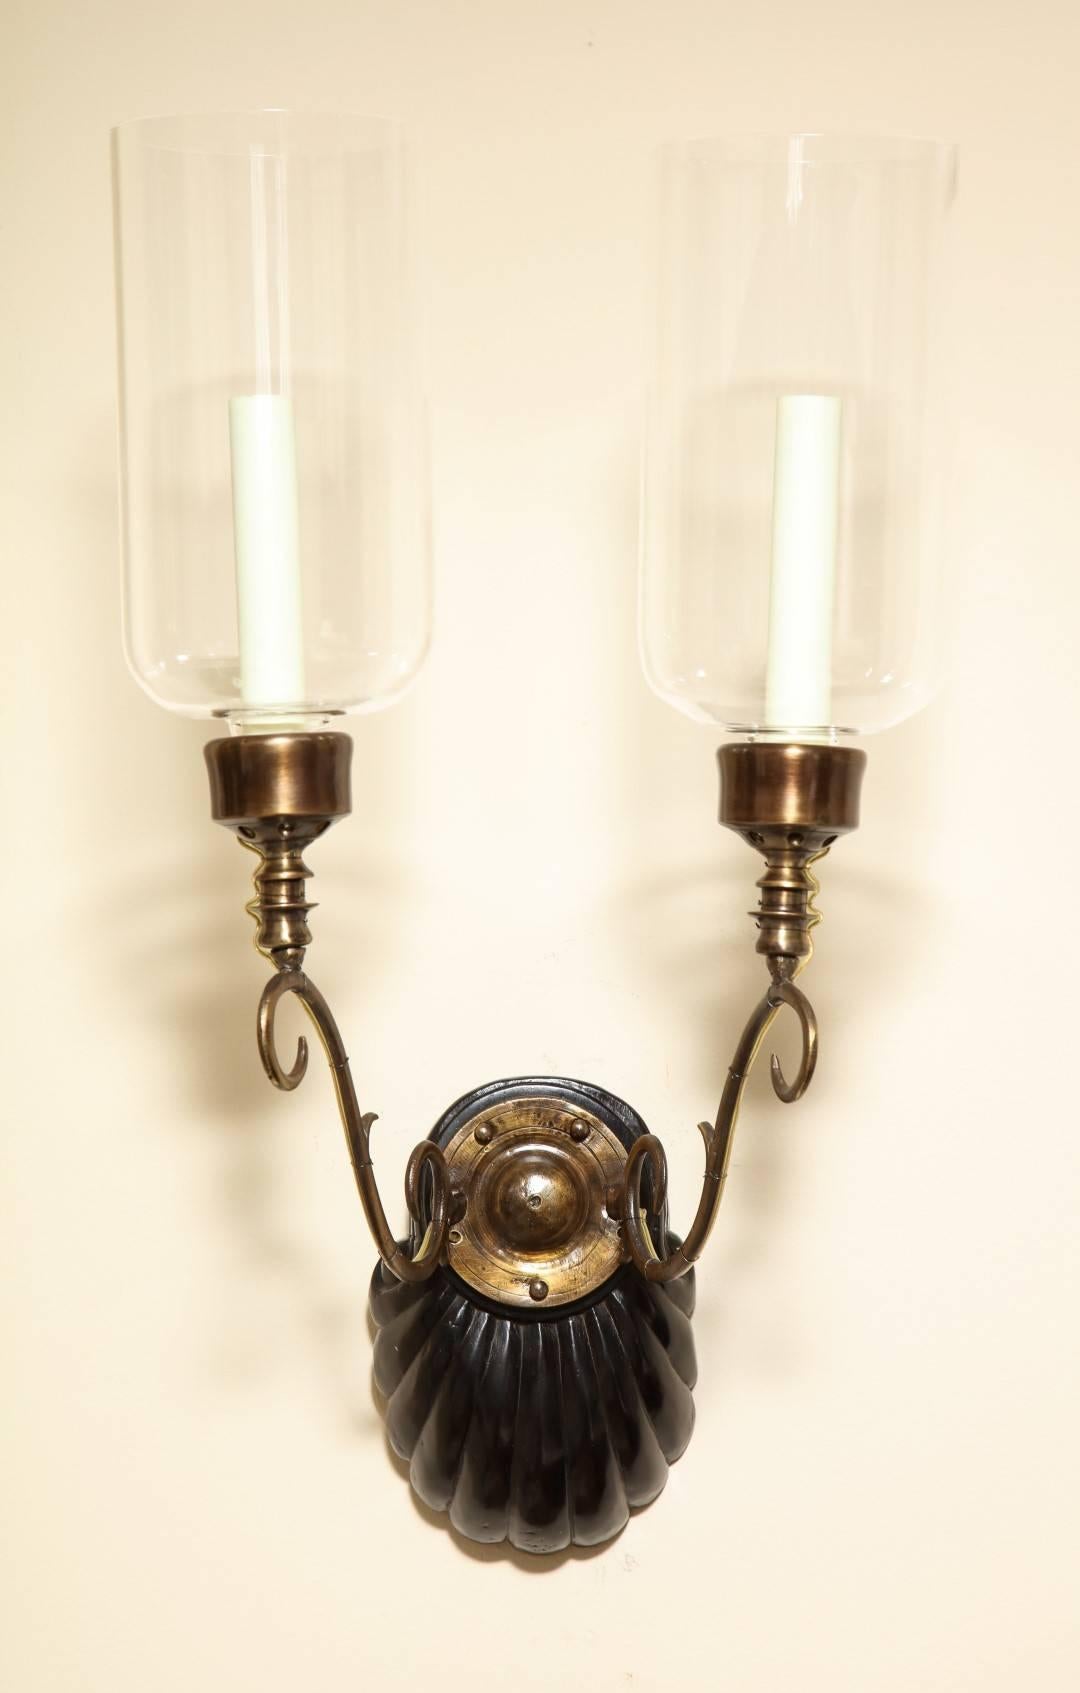 A Pair of Anglo-Indian two-light sconces, the shell form backplate issuing bronze out-scrolled candlearms supporting a single Edison socket with hurricane shade, circa 1890.
Provenance- These sconces were purchased by Albert Nestle in India, circa